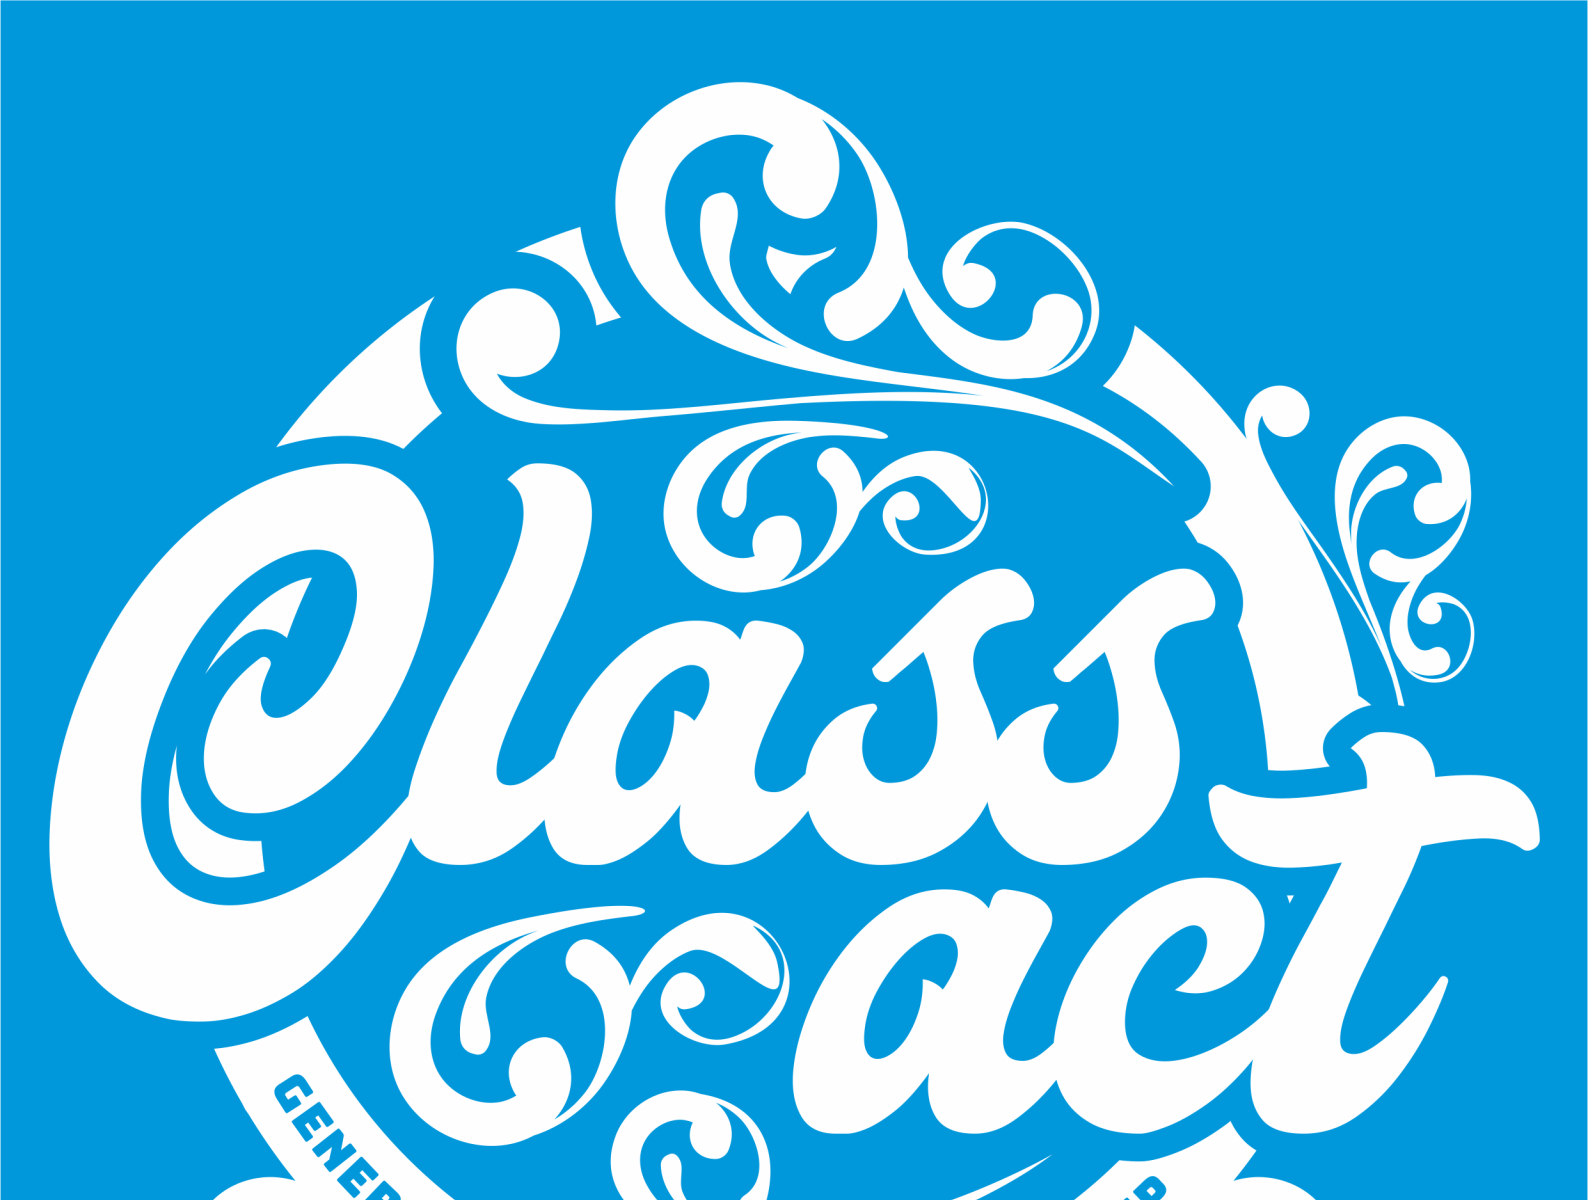 Class Act by Resty Capitle on Dribbble